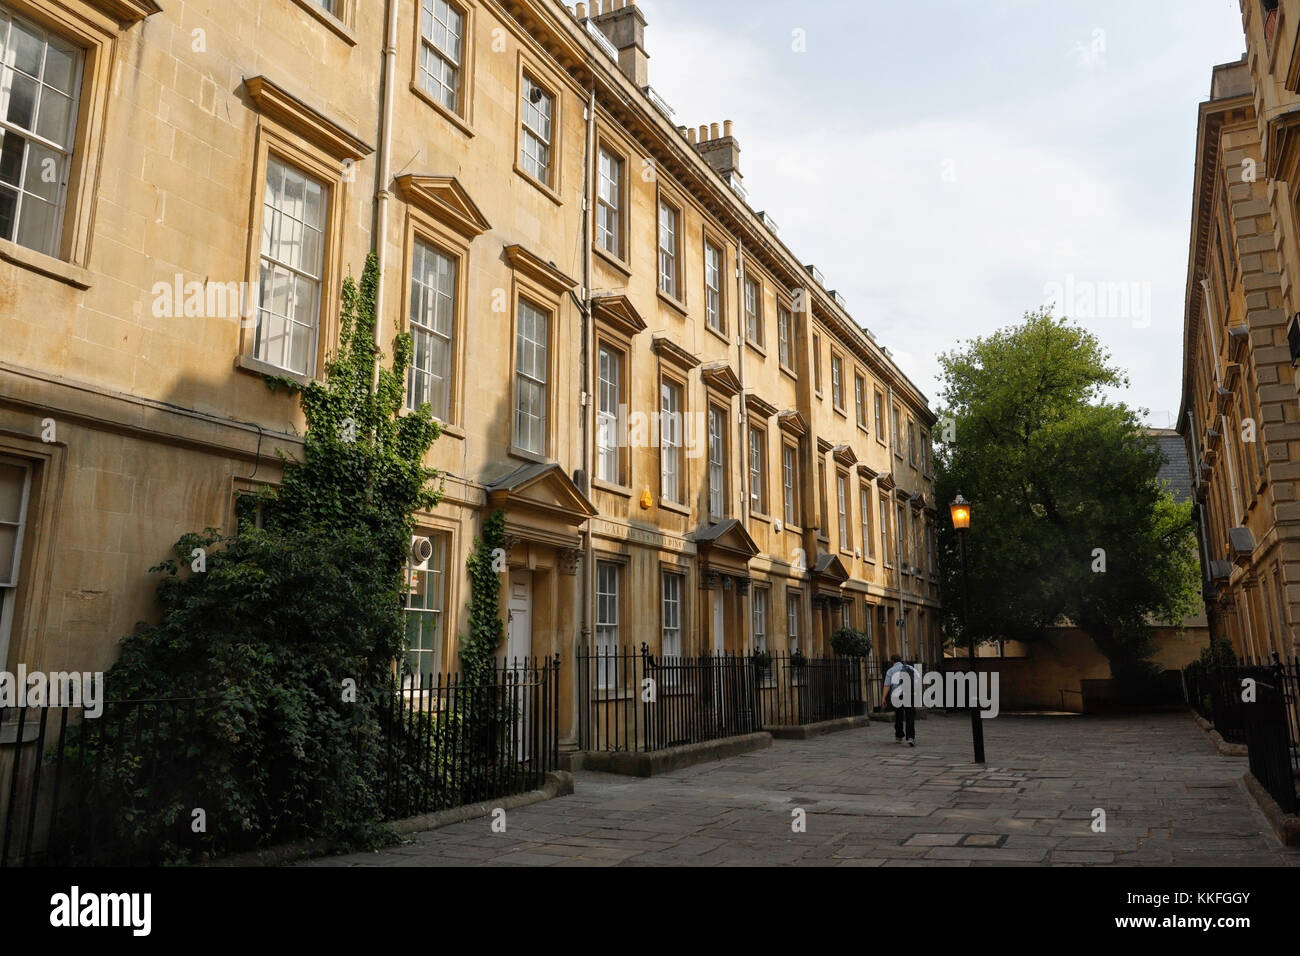 Terraced Georgian Buildings North Parade Buildings Bath England UK Period properties large townhouses world heritage city grade II listed architecture Stock Photo